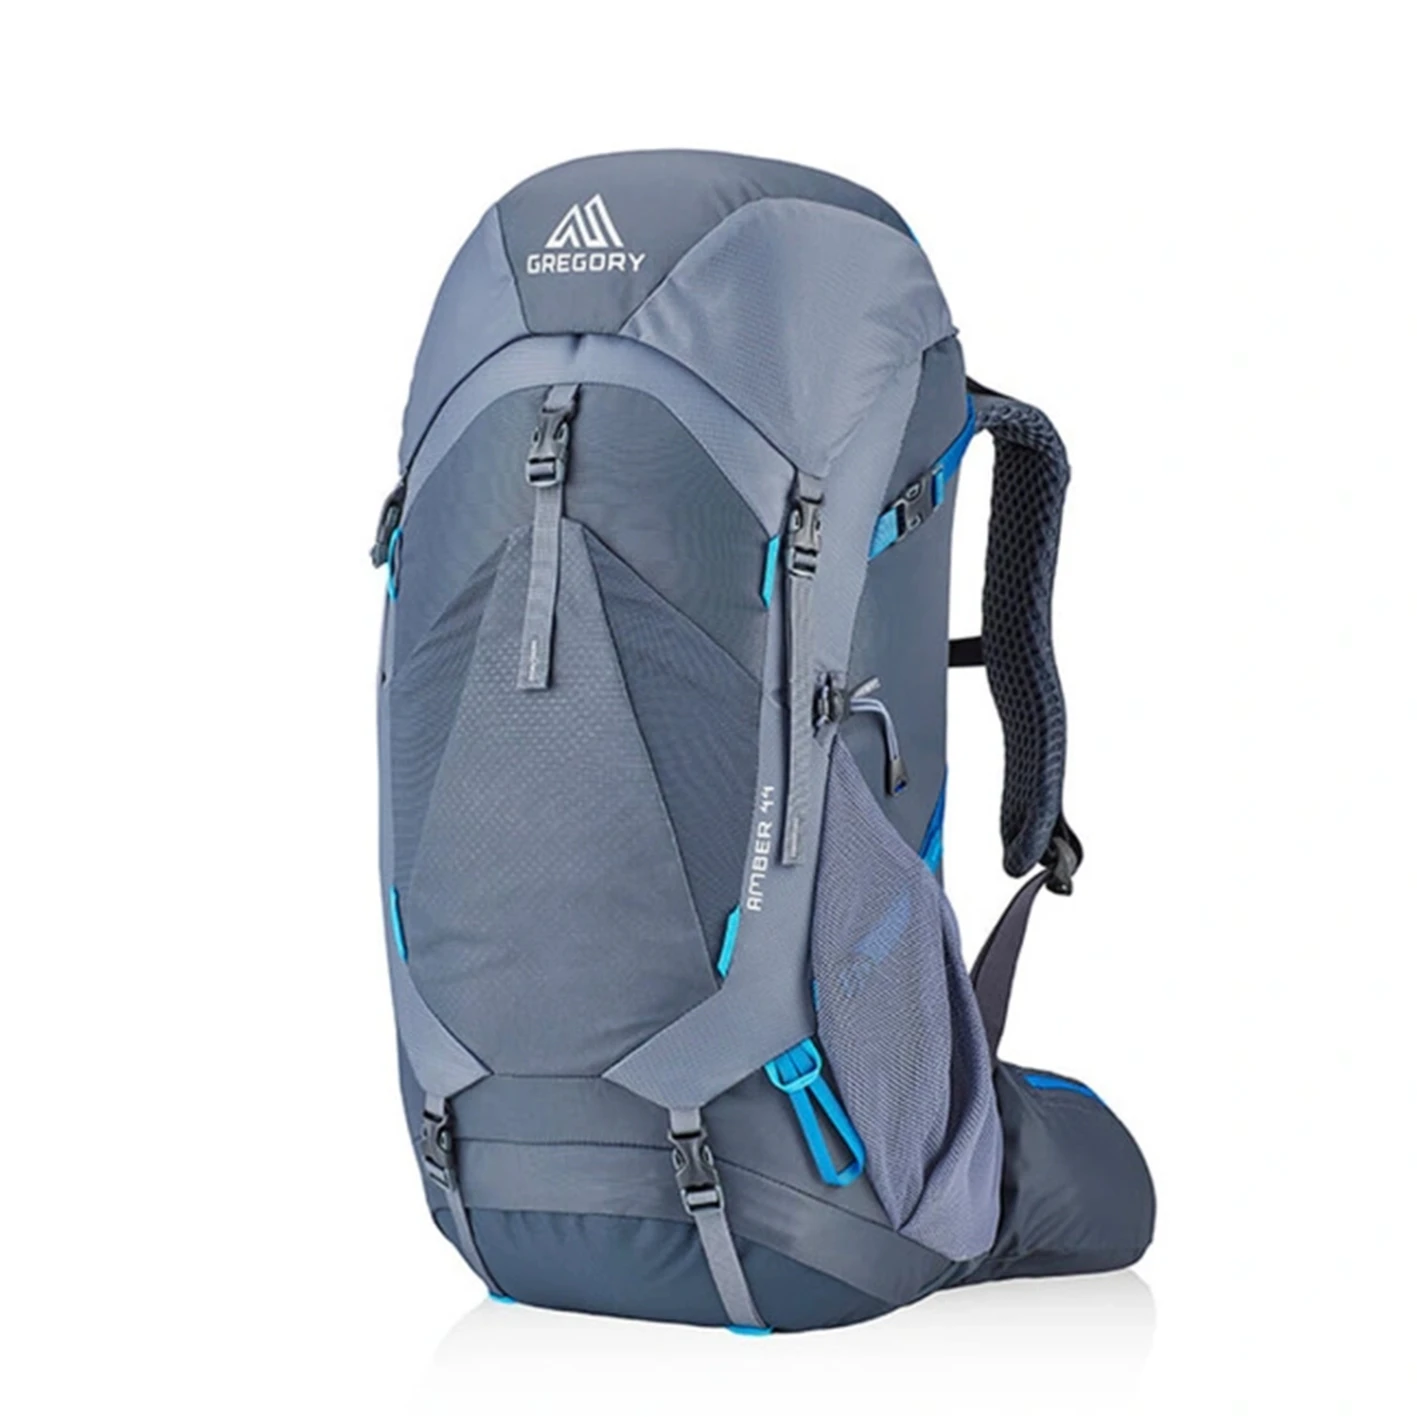 AMBER PLUS 44_0001_backpack-gregory-amber-44-plus-arctic-grey_converted_converted